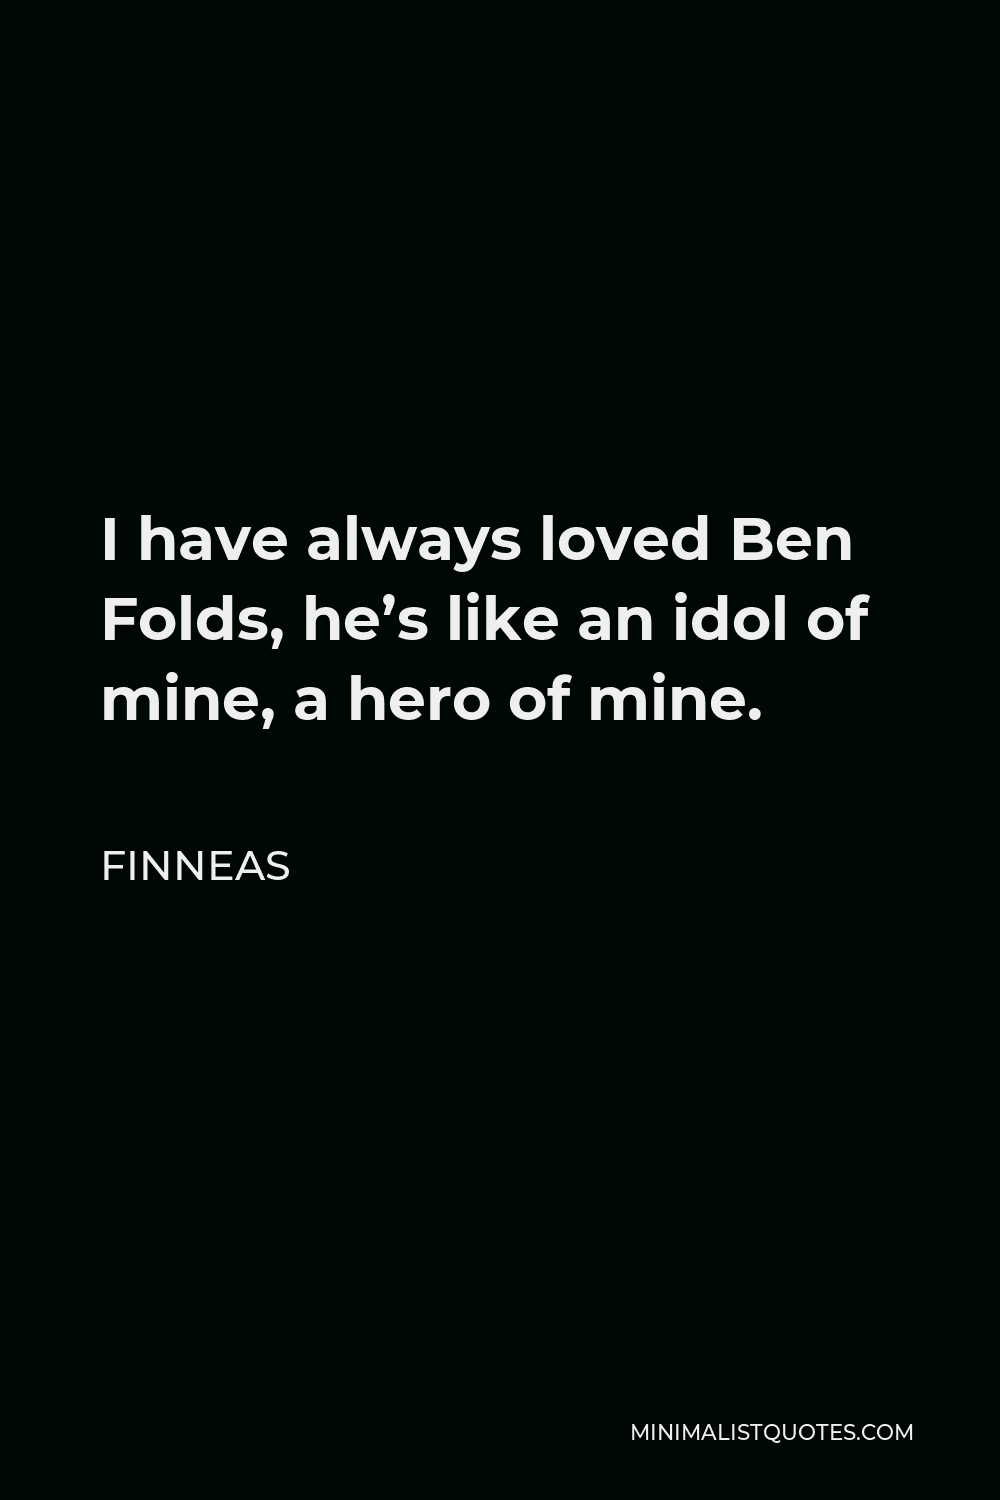 Finneas Quote - I have always loved Ben Folds, he’s like an idol of mine, a hero of mine.